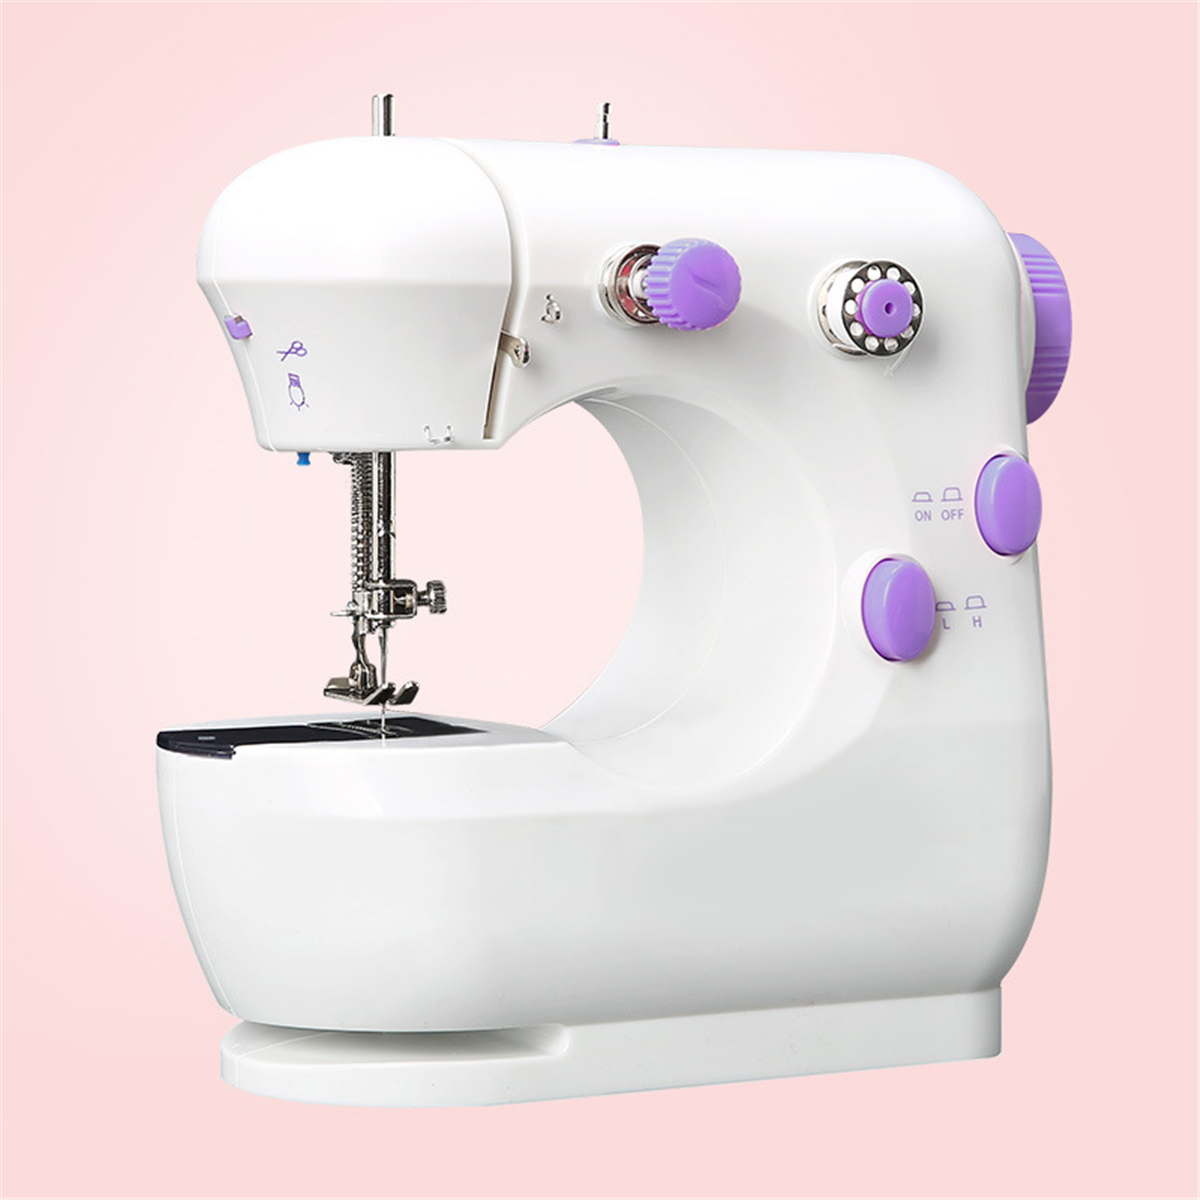 Mini-Portable-Electric-Desktop-Sewing-Machine-2-Speeds-For-DIY-Stitch-Clothes-Fabric-1690684-10